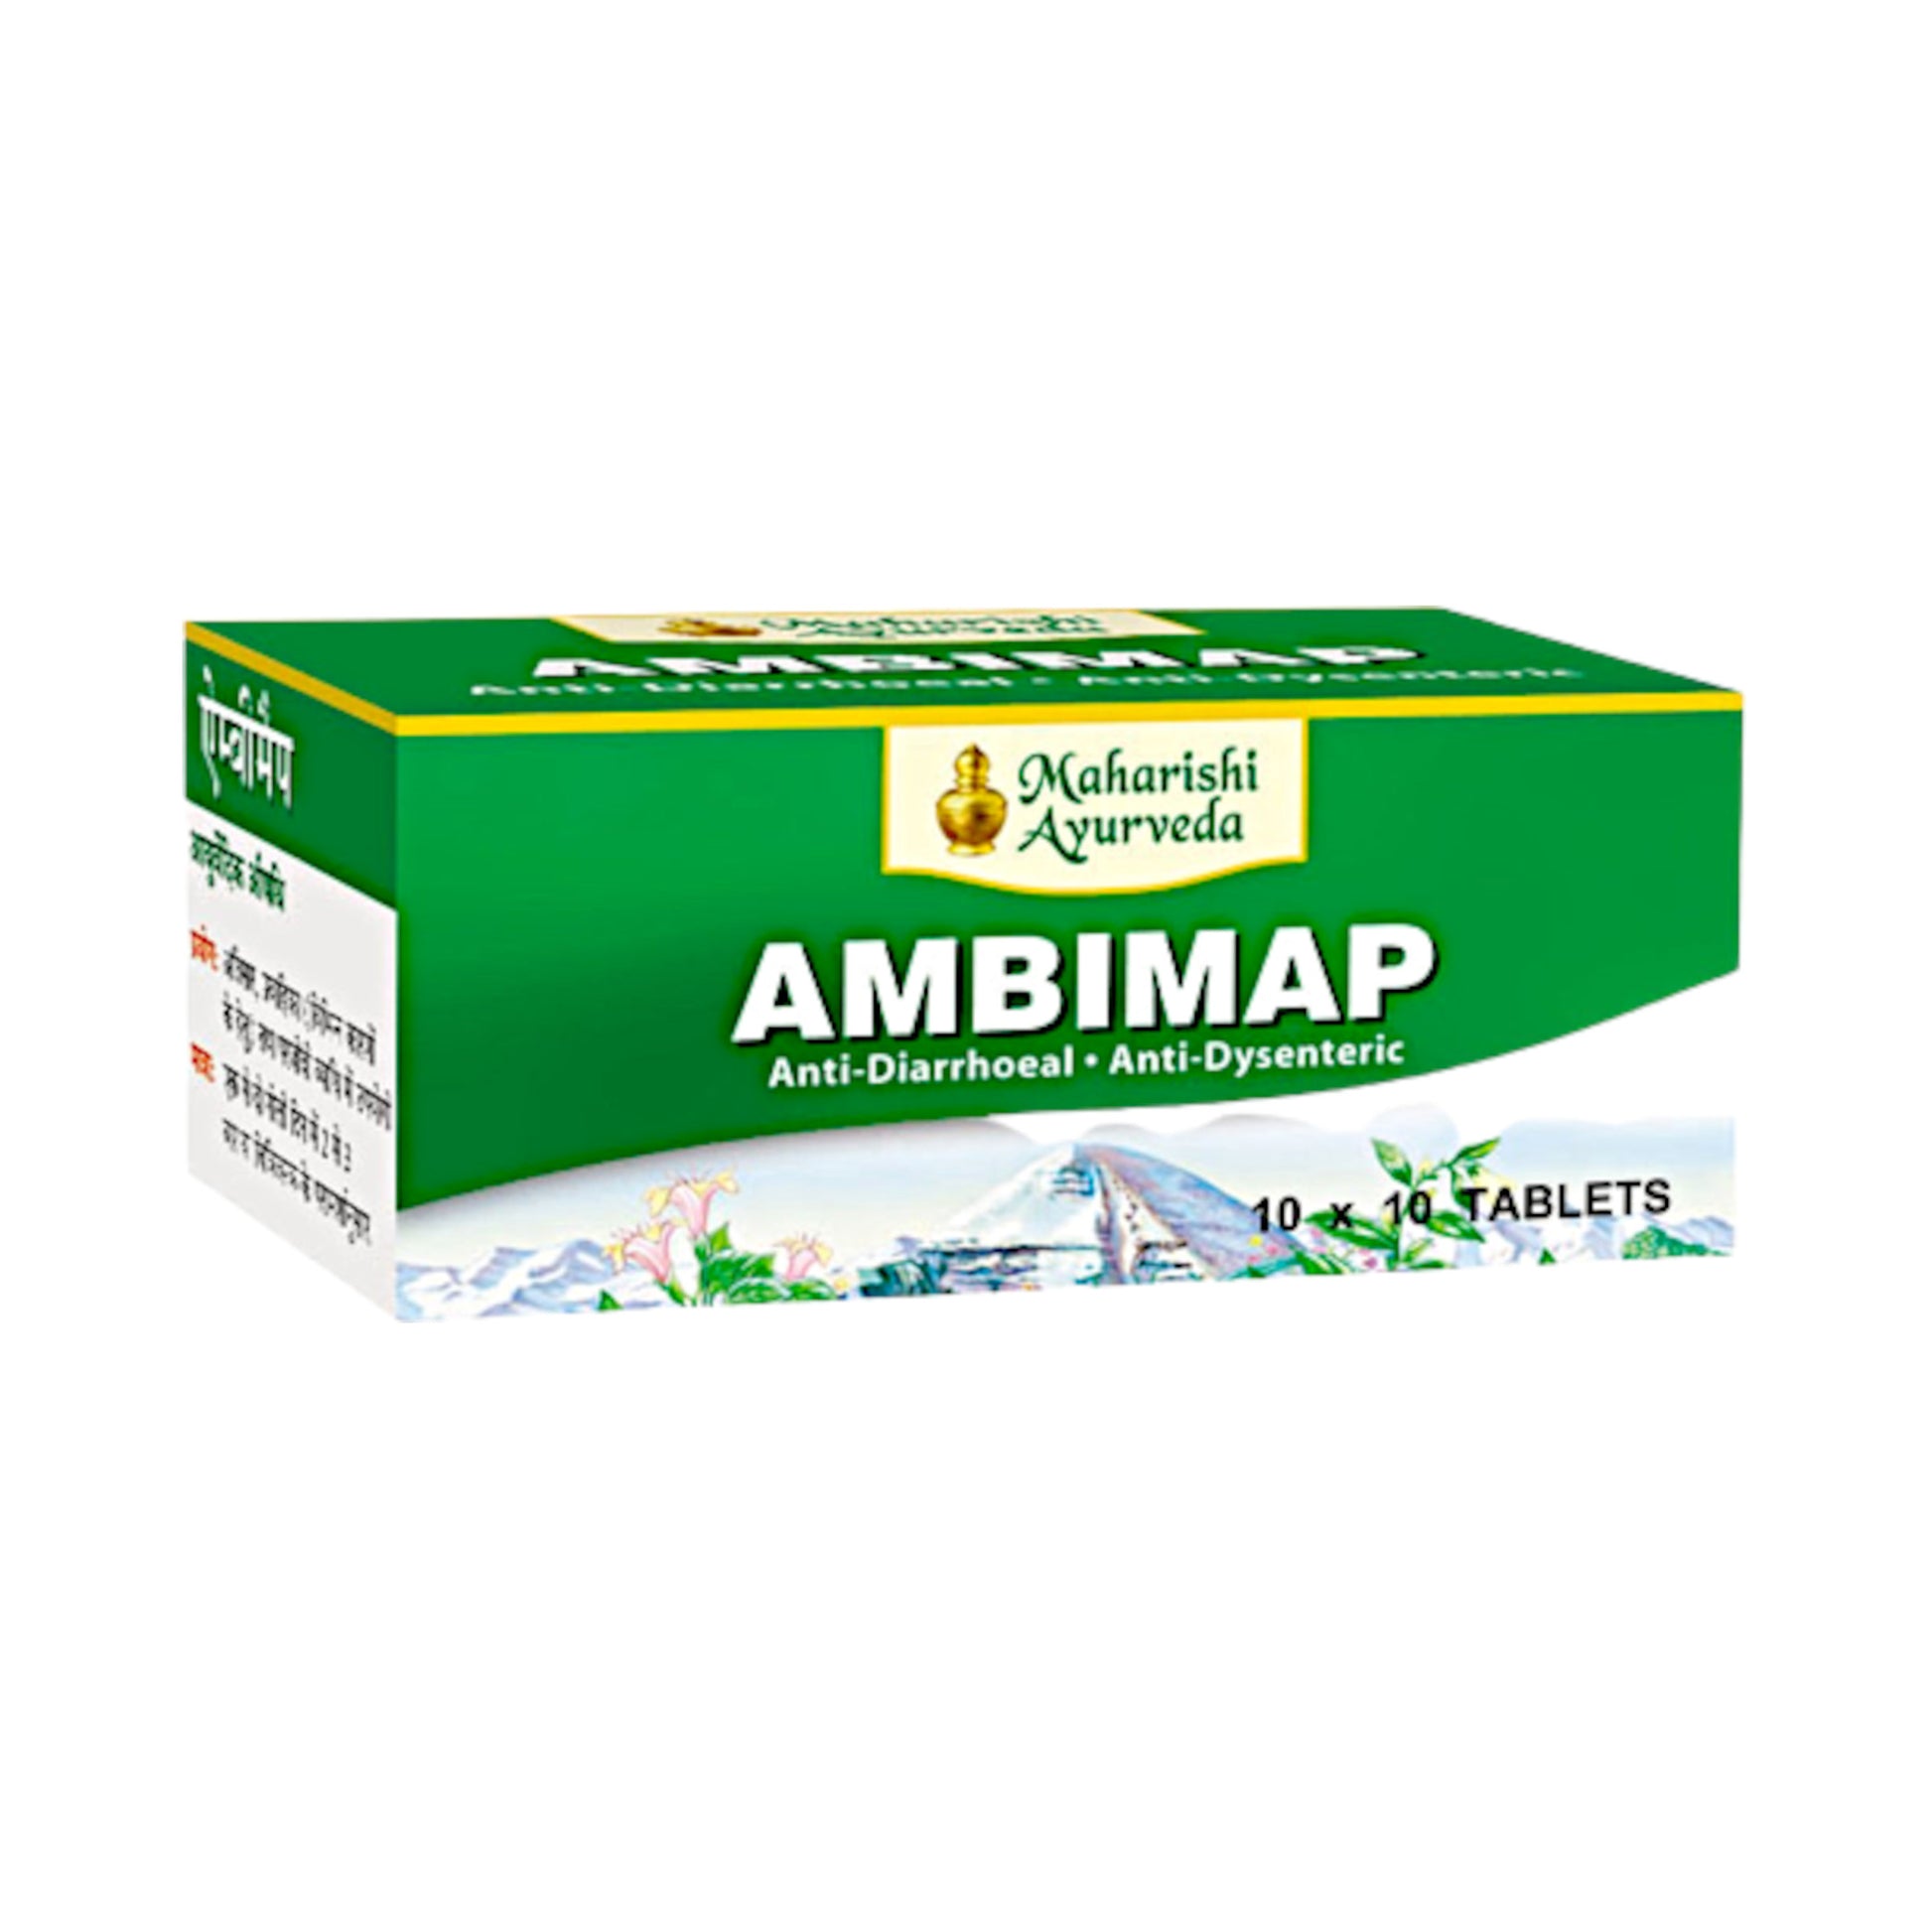 Maharishi Ayurveda - Ambimap 100 Tablets: Supports healthy digestion and gastrointestinal well-being.